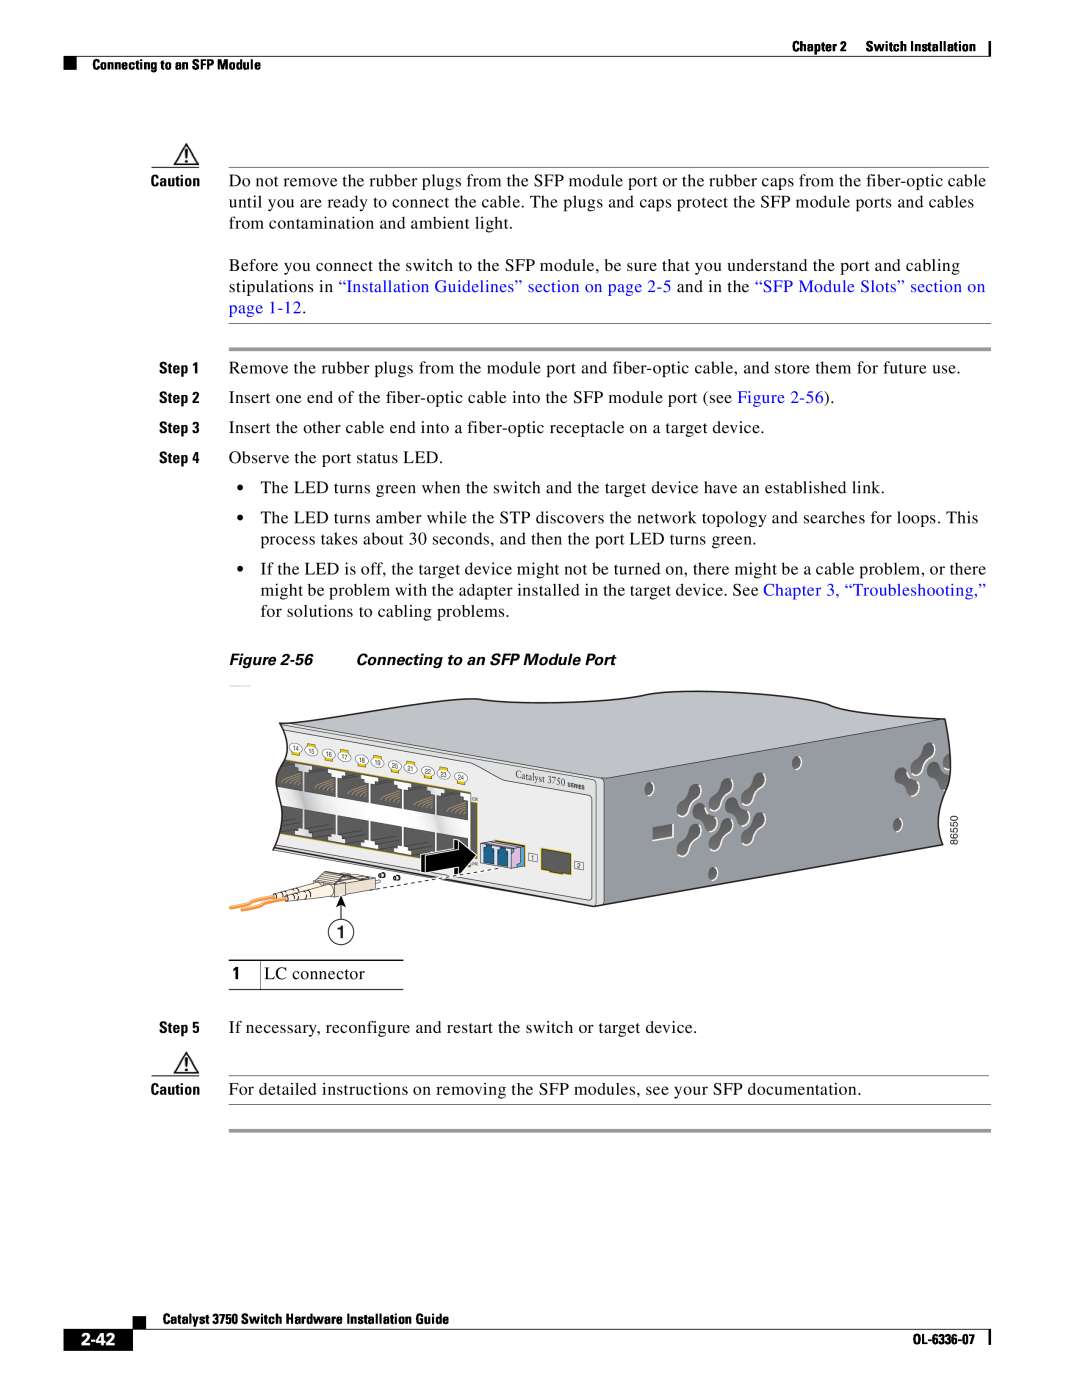 Cisco Systems WSC3750X24TS specifications Observe the port status LED, 2-42 